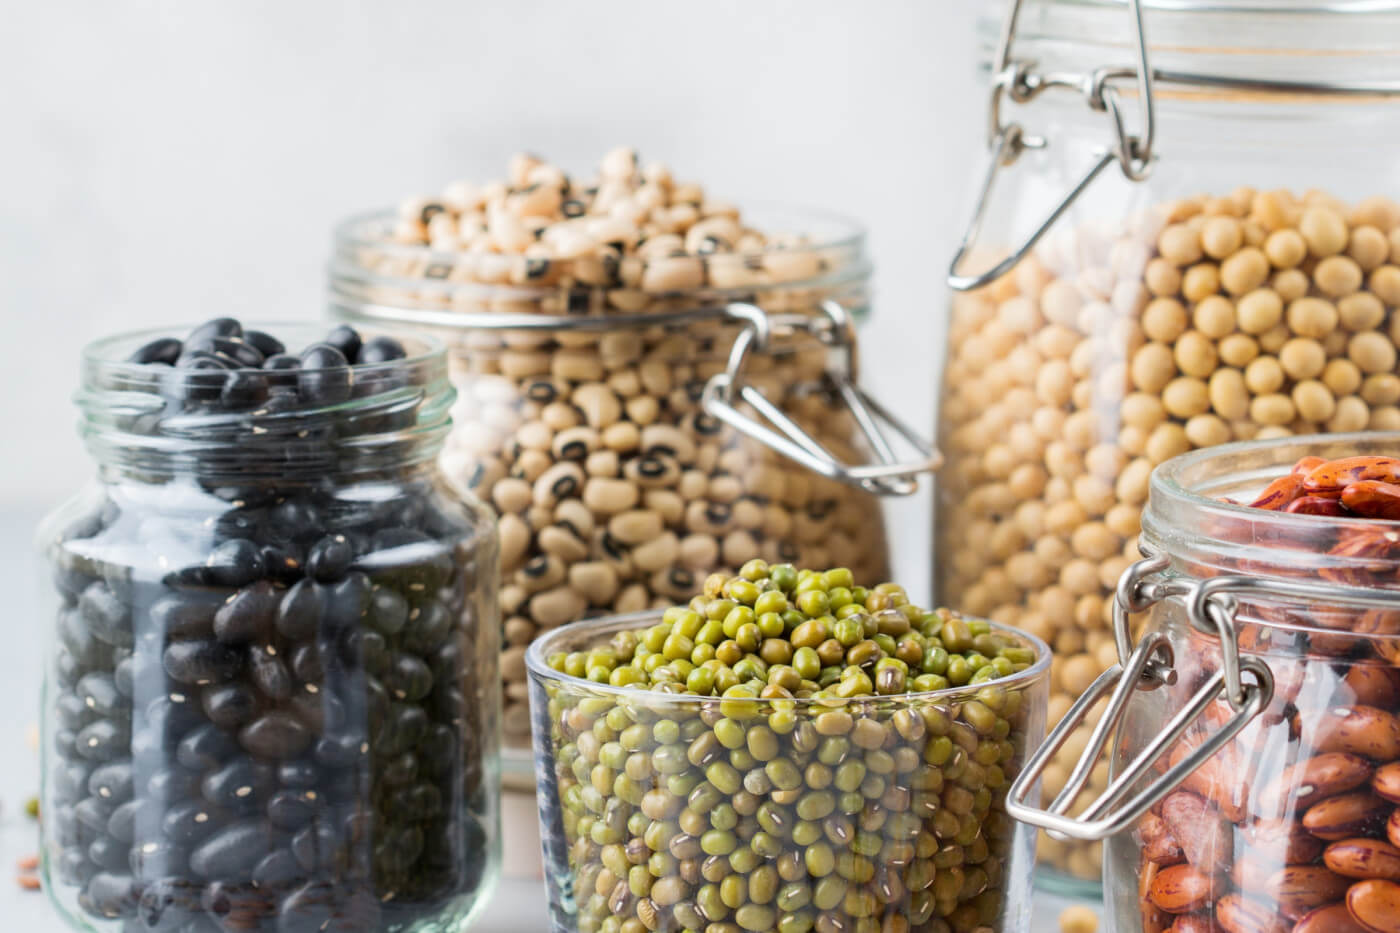 Jars full of different legumes add dietary fiber to a bariatric meal plan